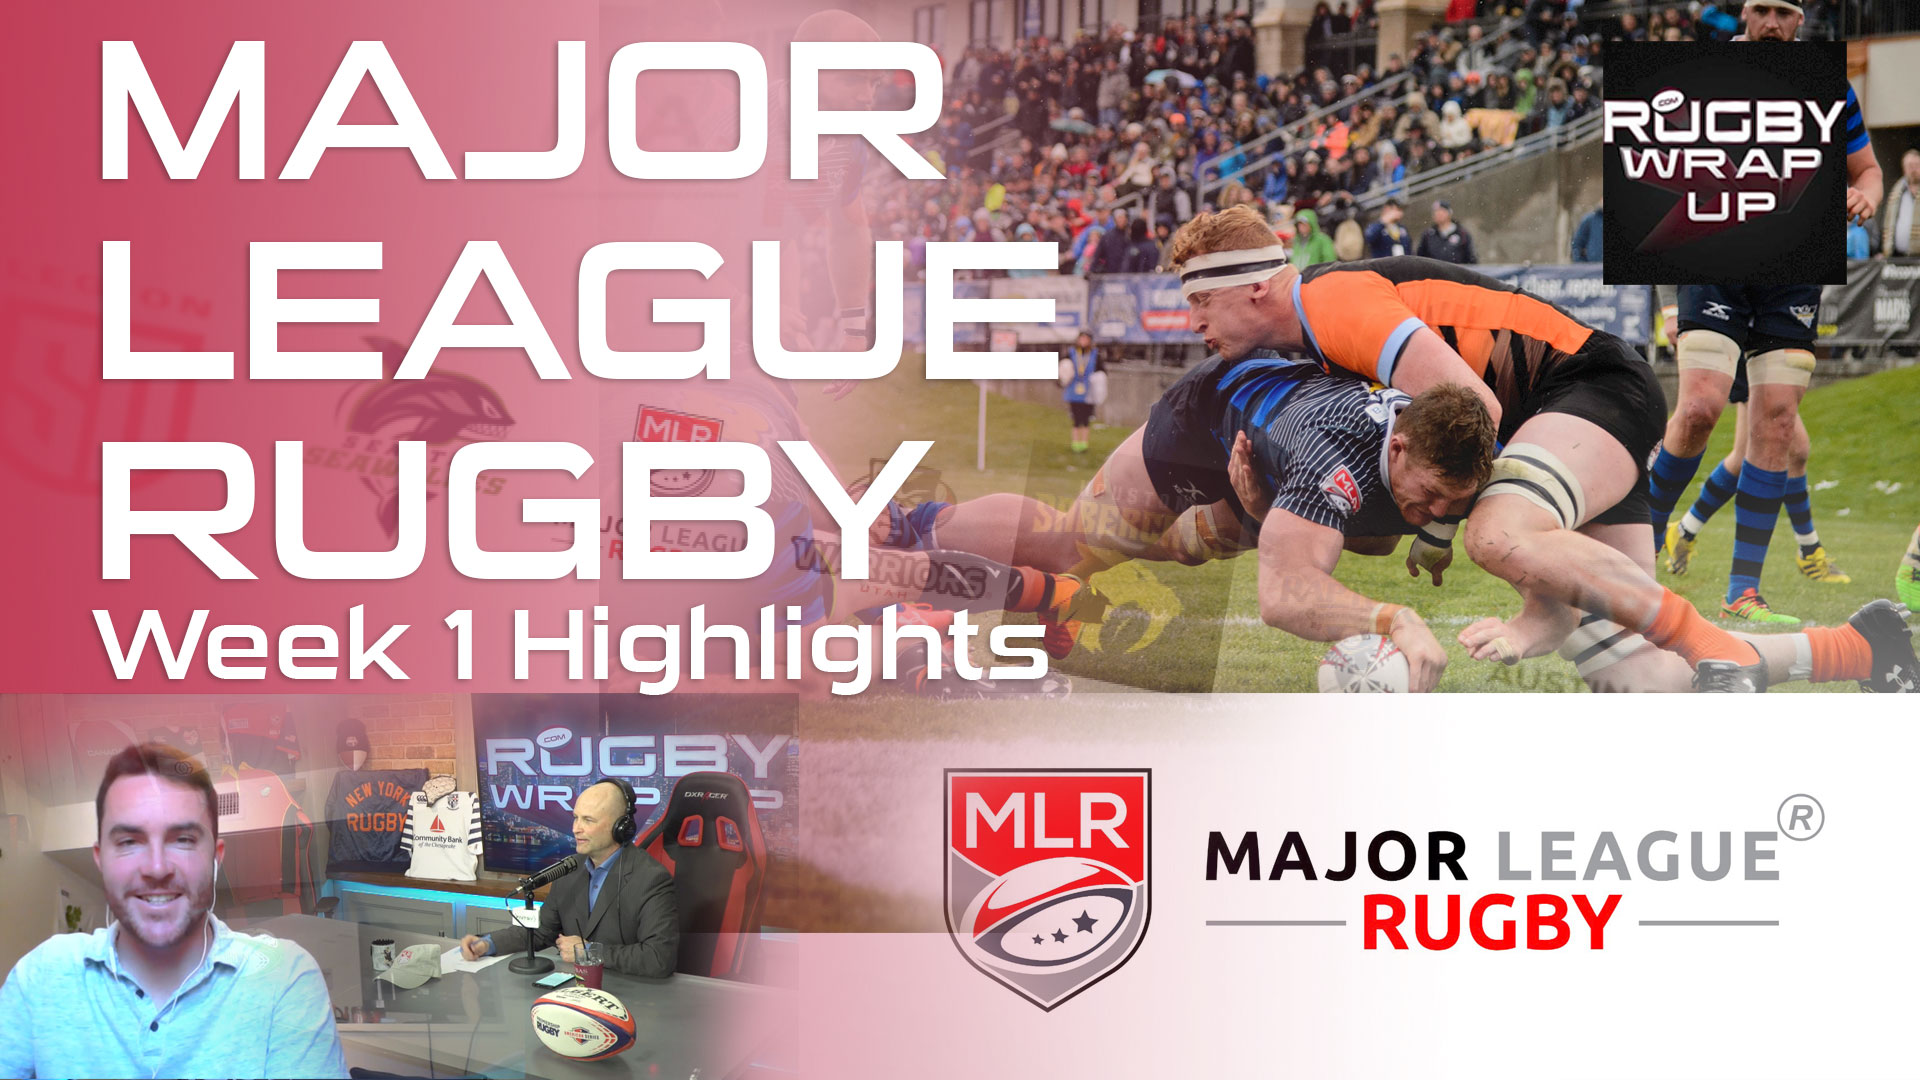 Major League Rugby: Recap, Predictions, Interviews with Davies, Quill, Magie, Fawsitt